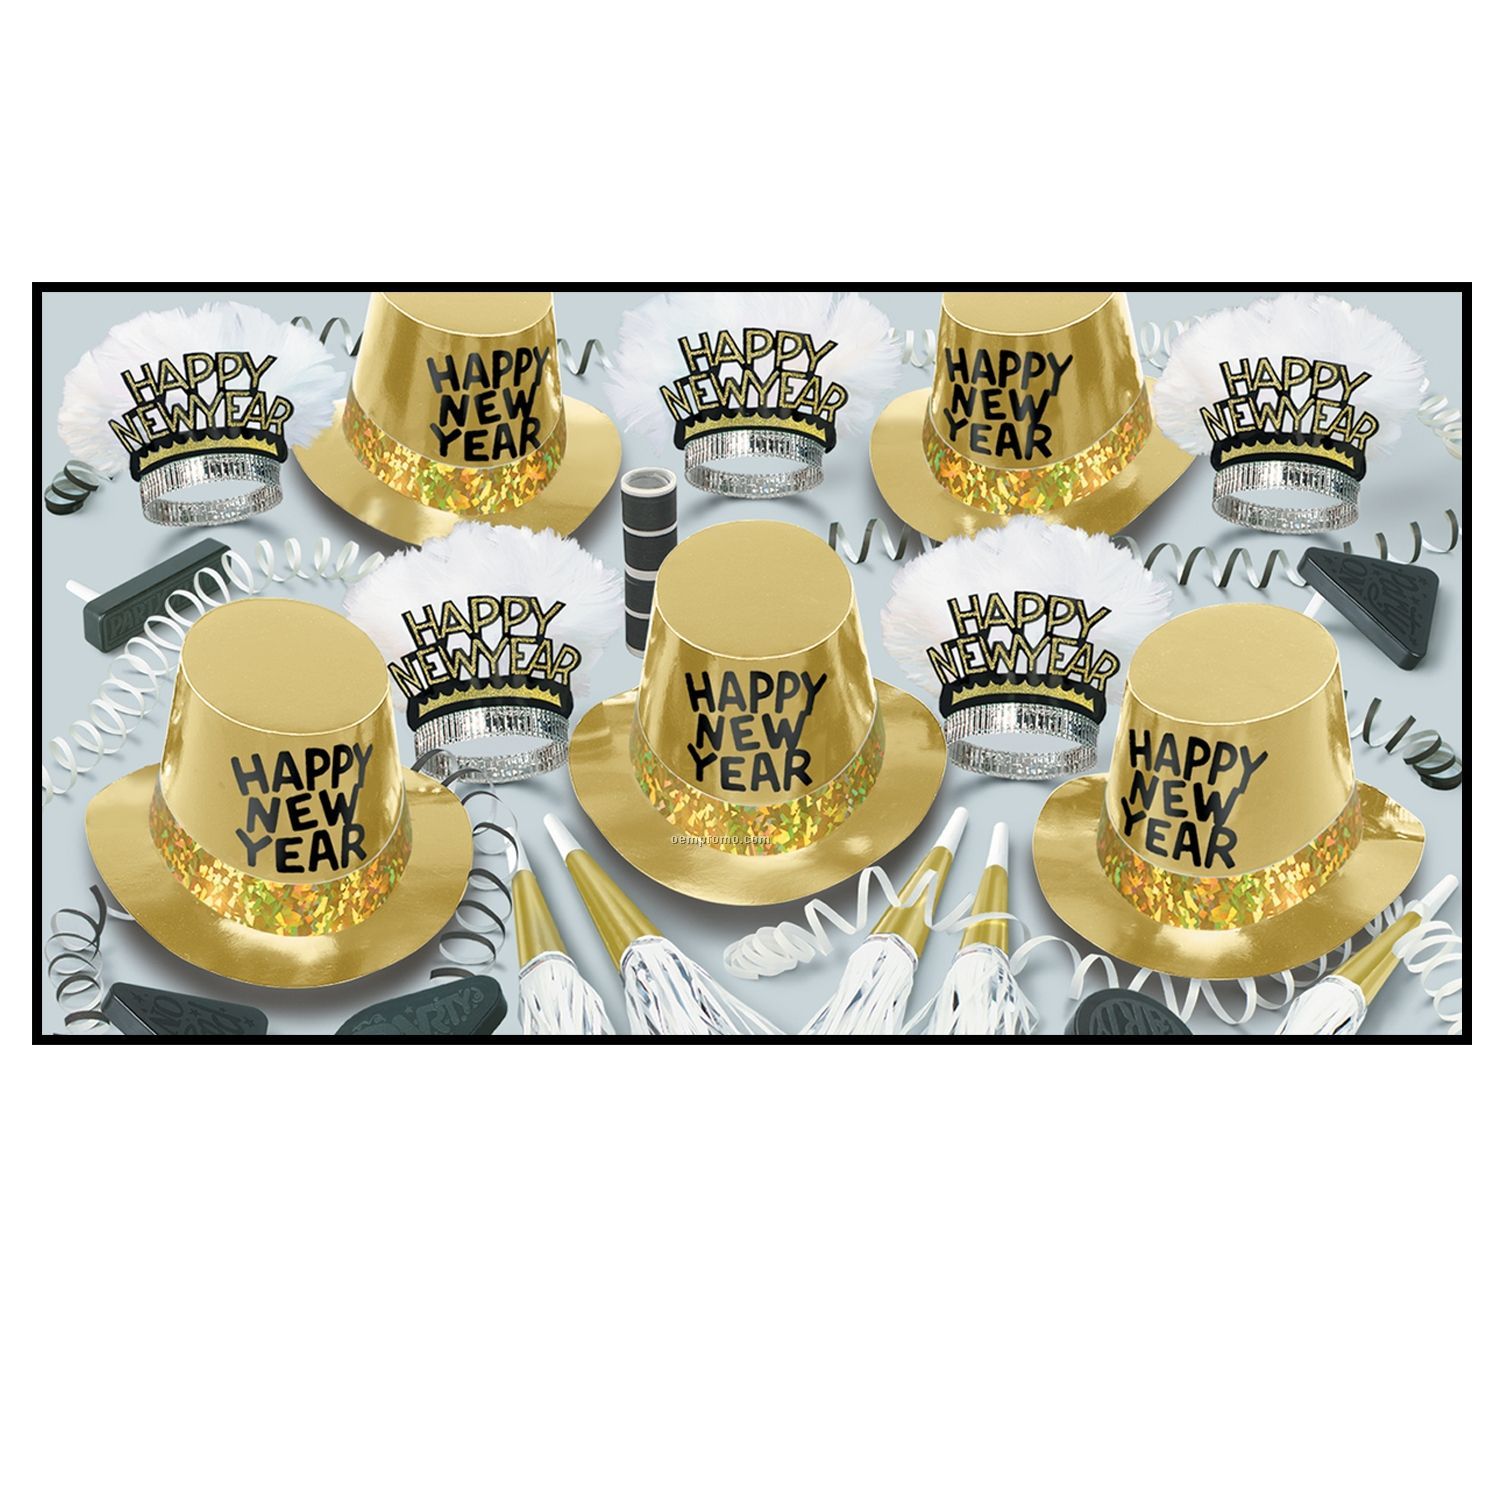 The Gold Rush New Year Assortment For 25